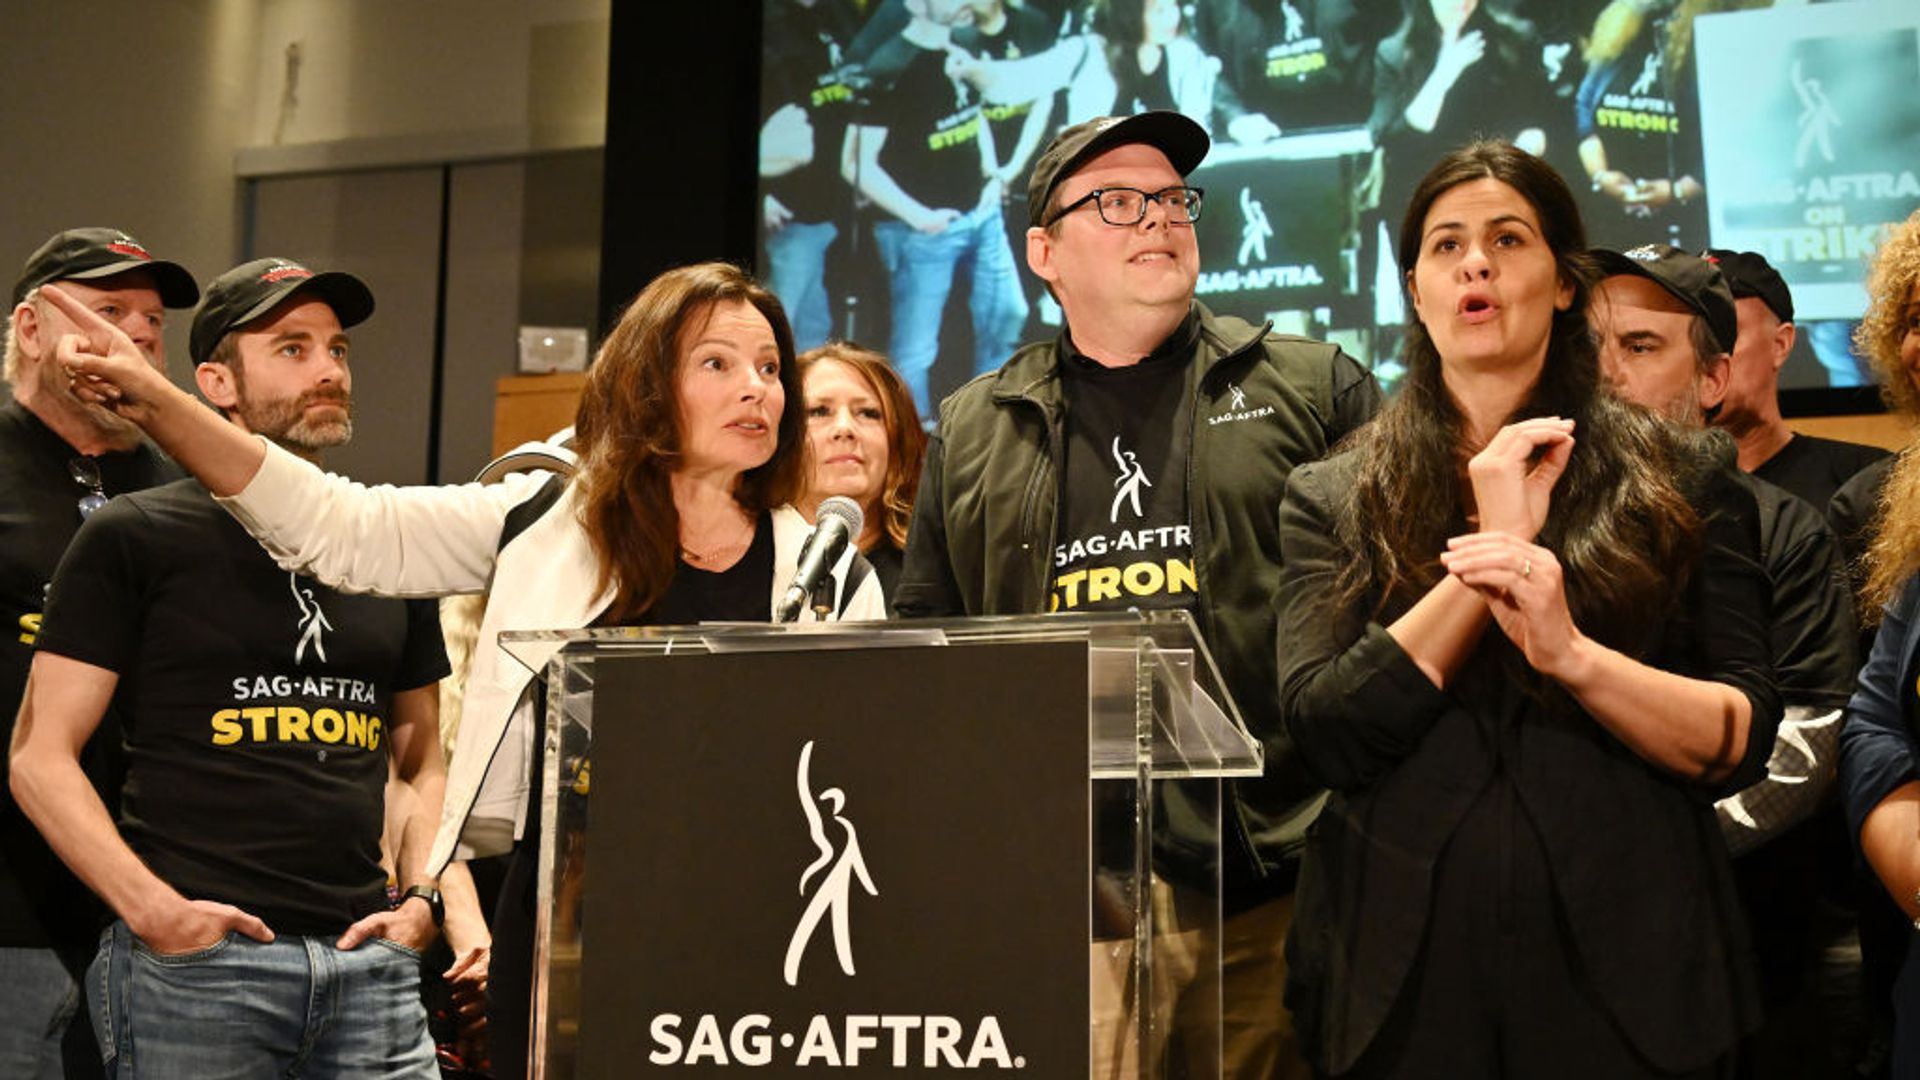 Fran Drescher delivers a passionate speech during a press conference at the SAG-AFTRA headquarters in Los Angeles